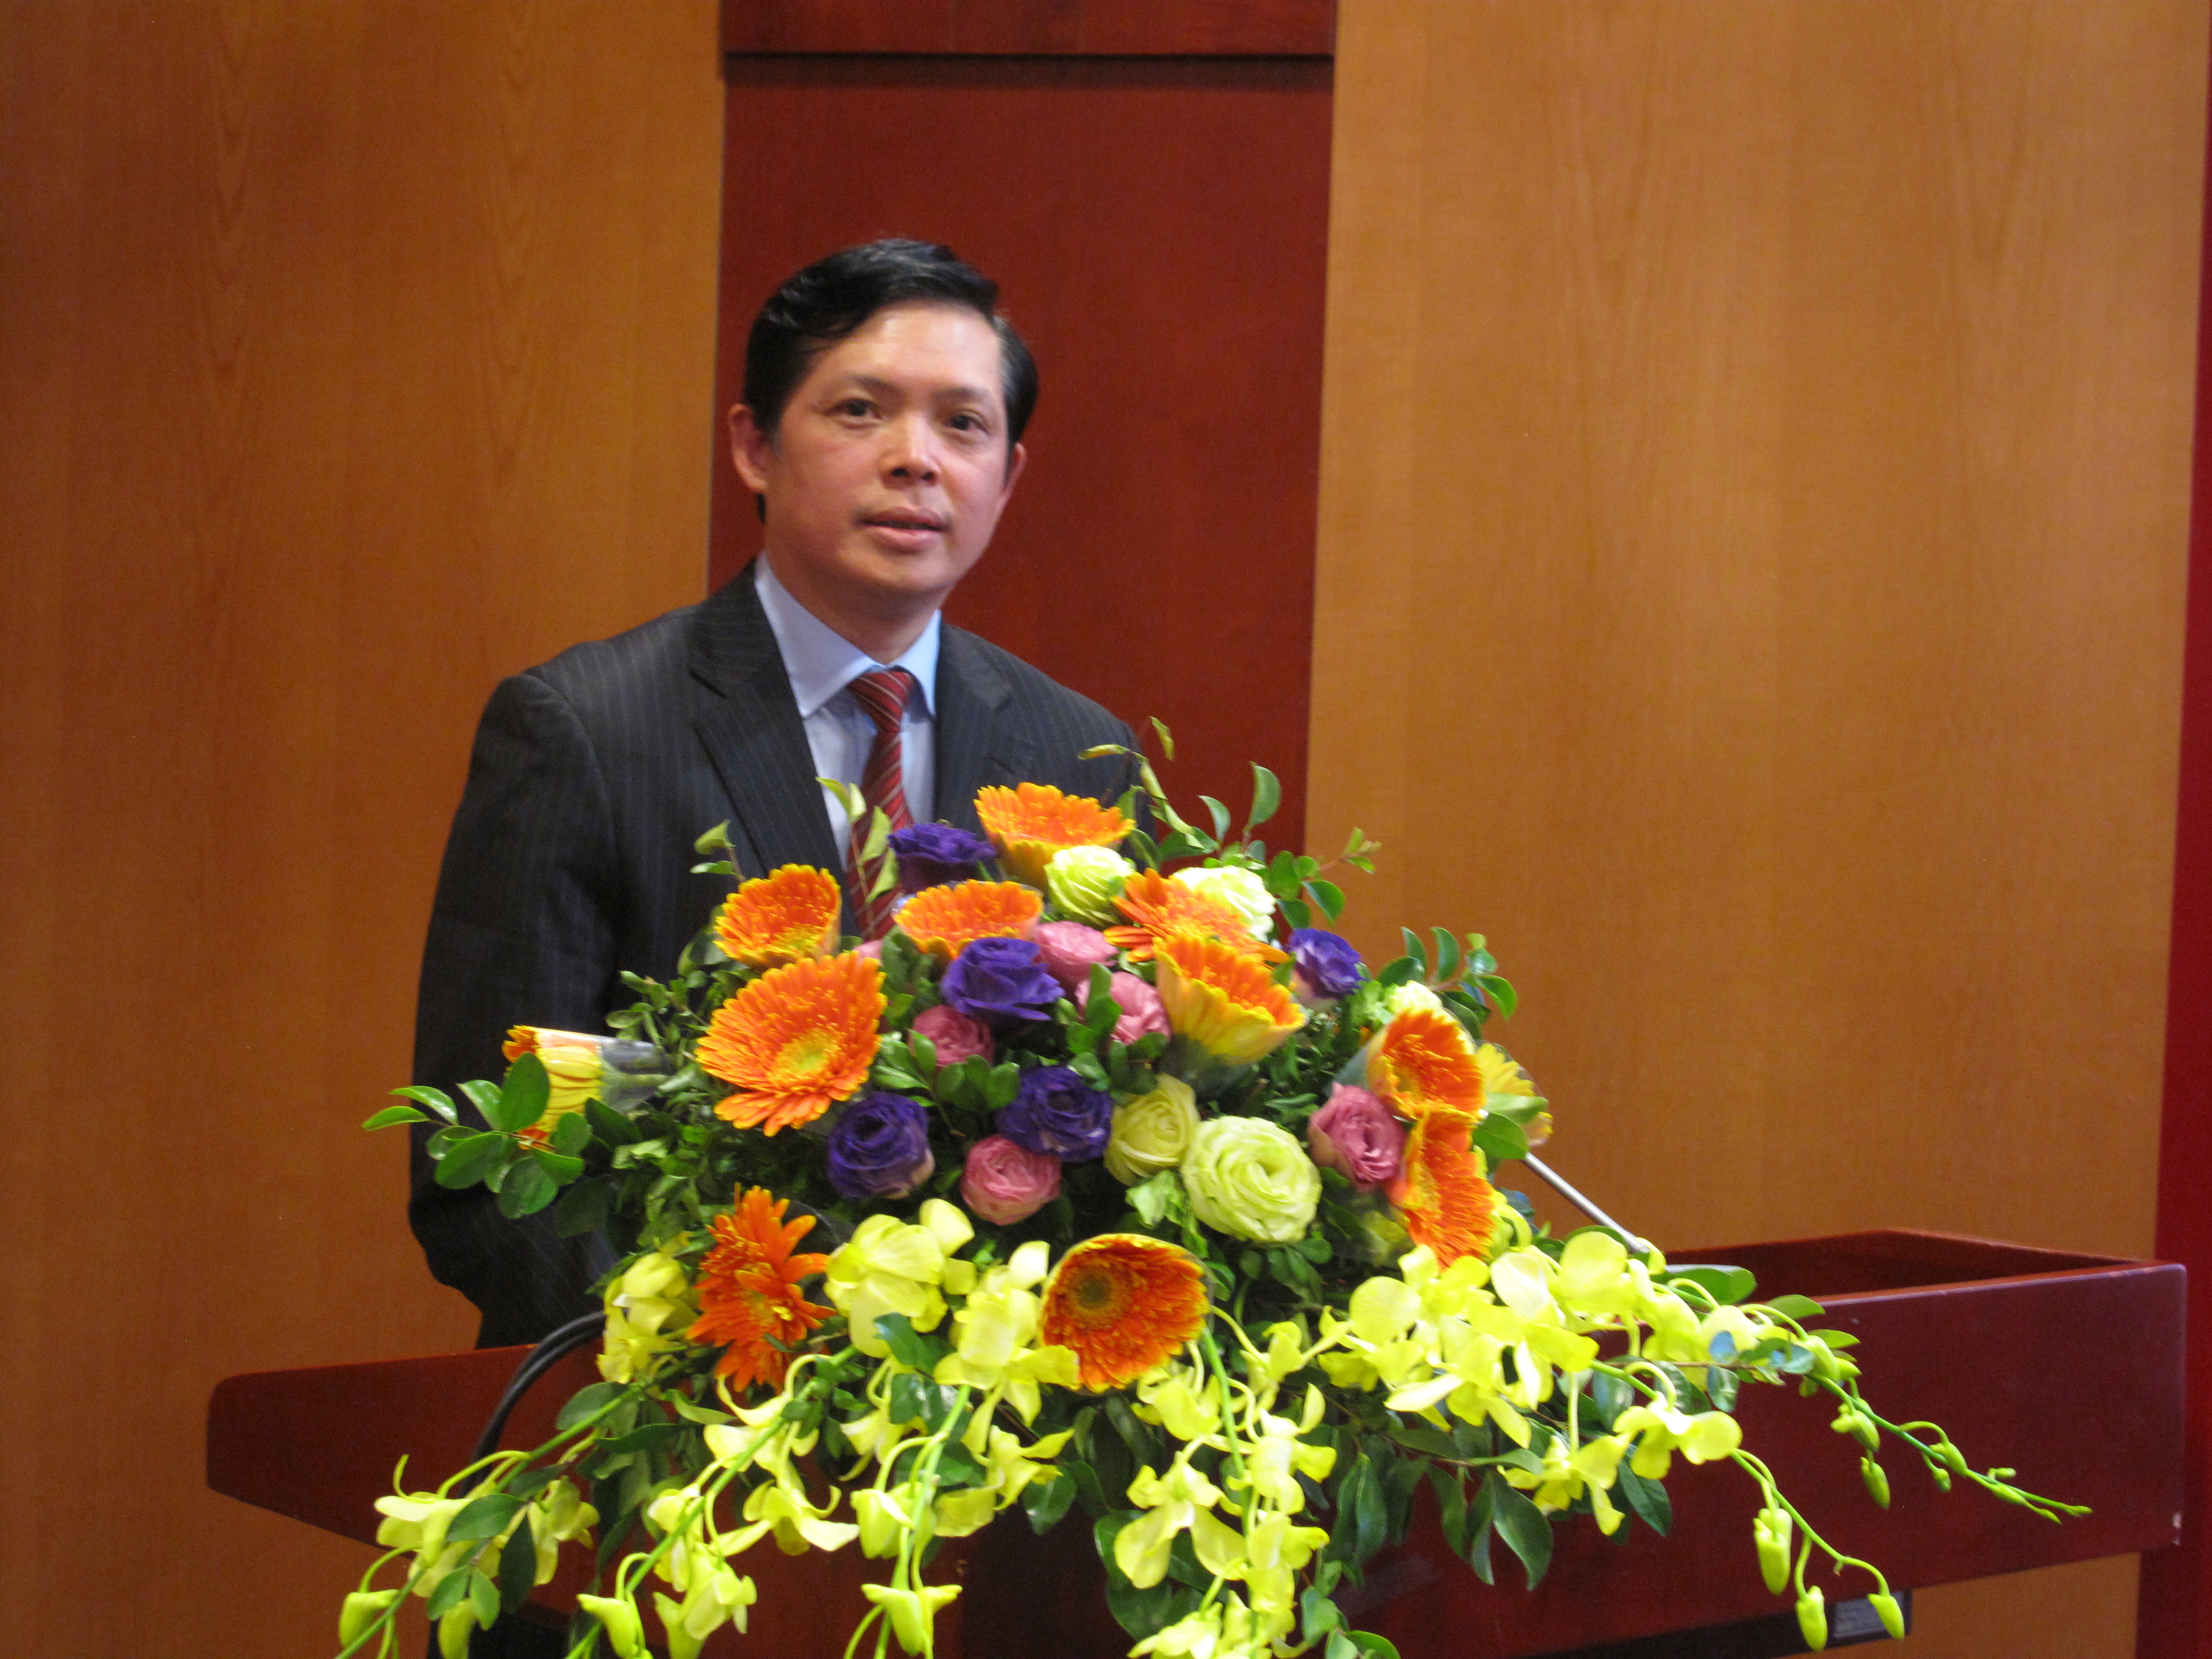 Assoc.Prof.Dr. Nguyen Chien Thang, Director of the Institute for European Studies gave a closing speech of the Conference